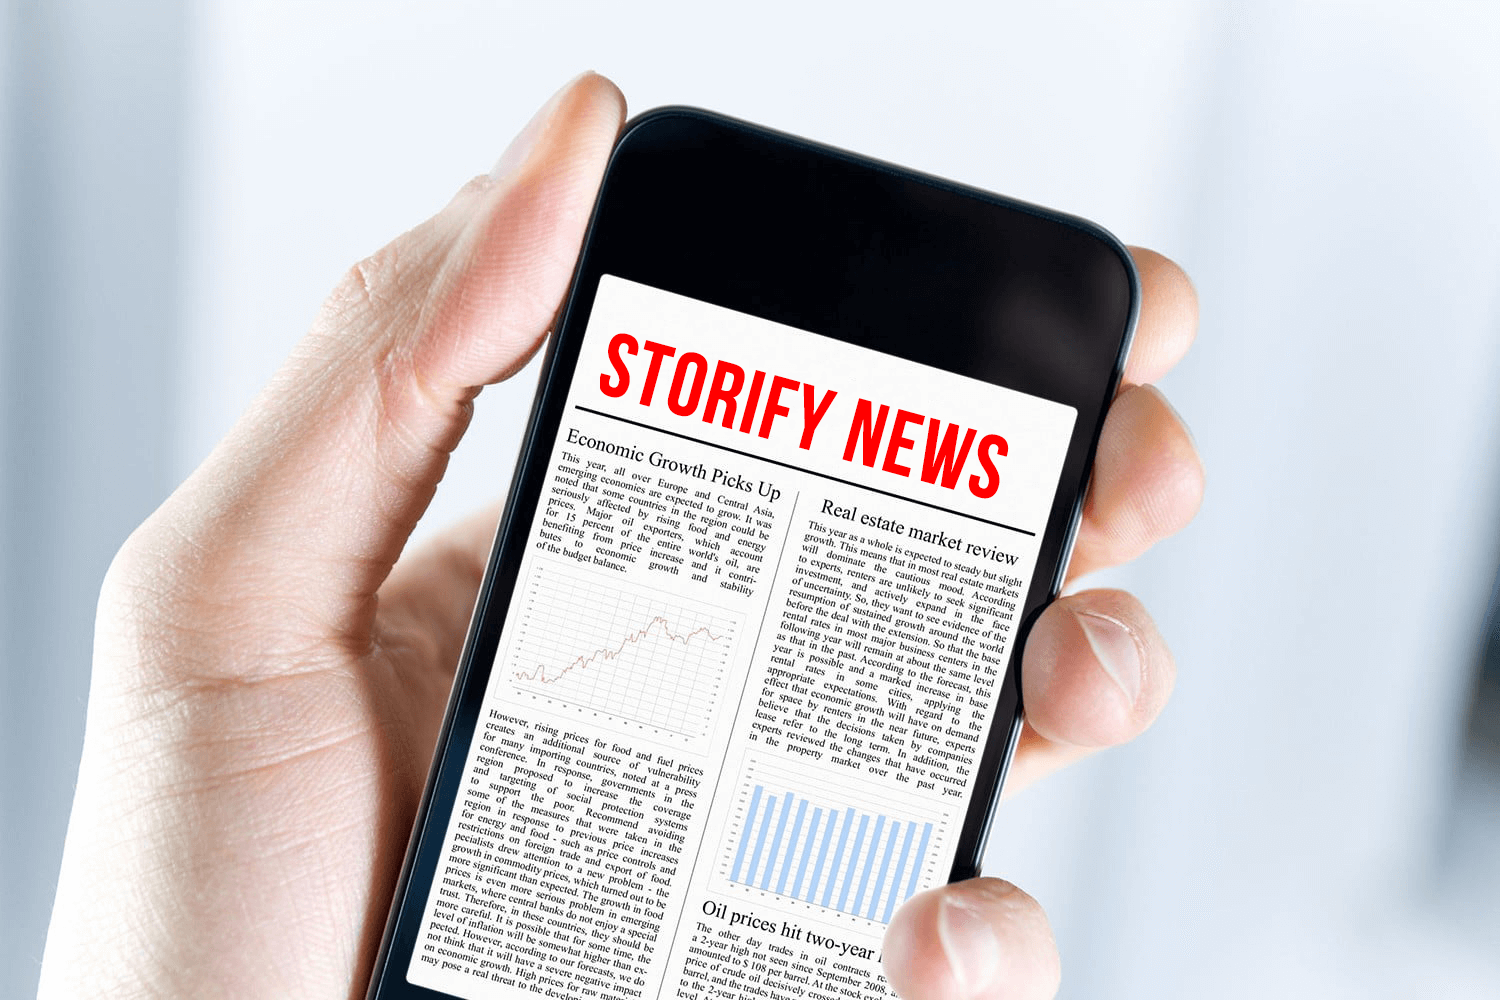 Storify News Giving an Opportunity for Writers – Write for us